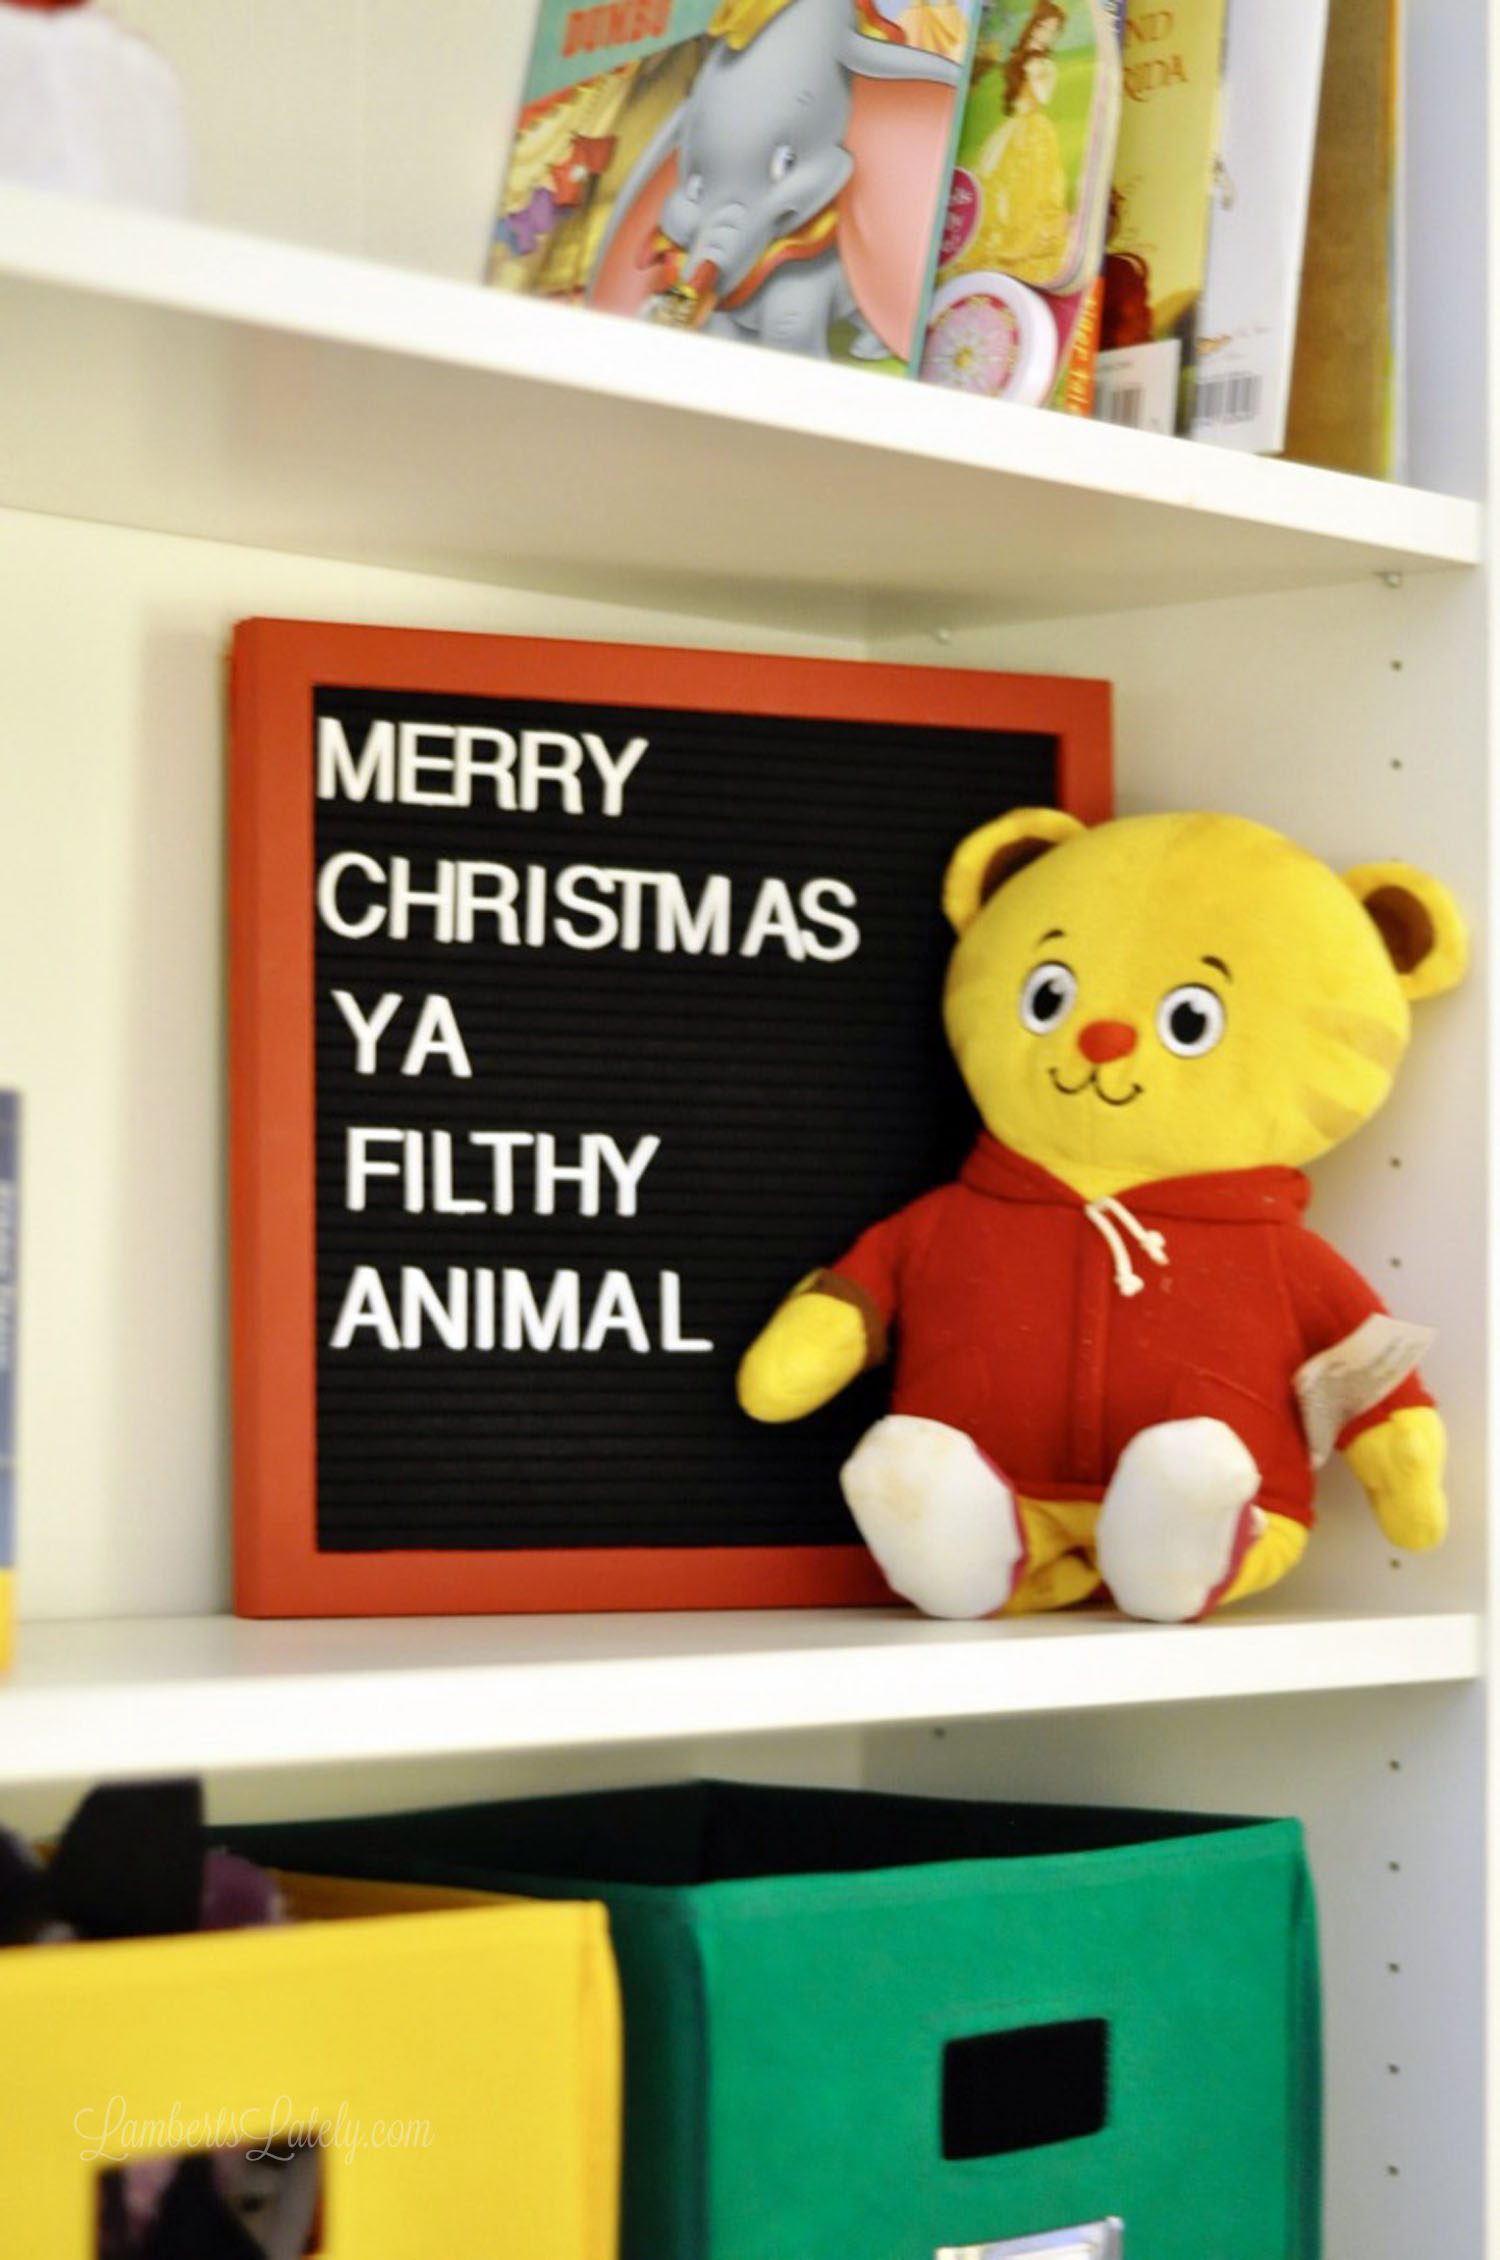 letter sign with merry christmas ya filthy animal, stuffed animal in front.